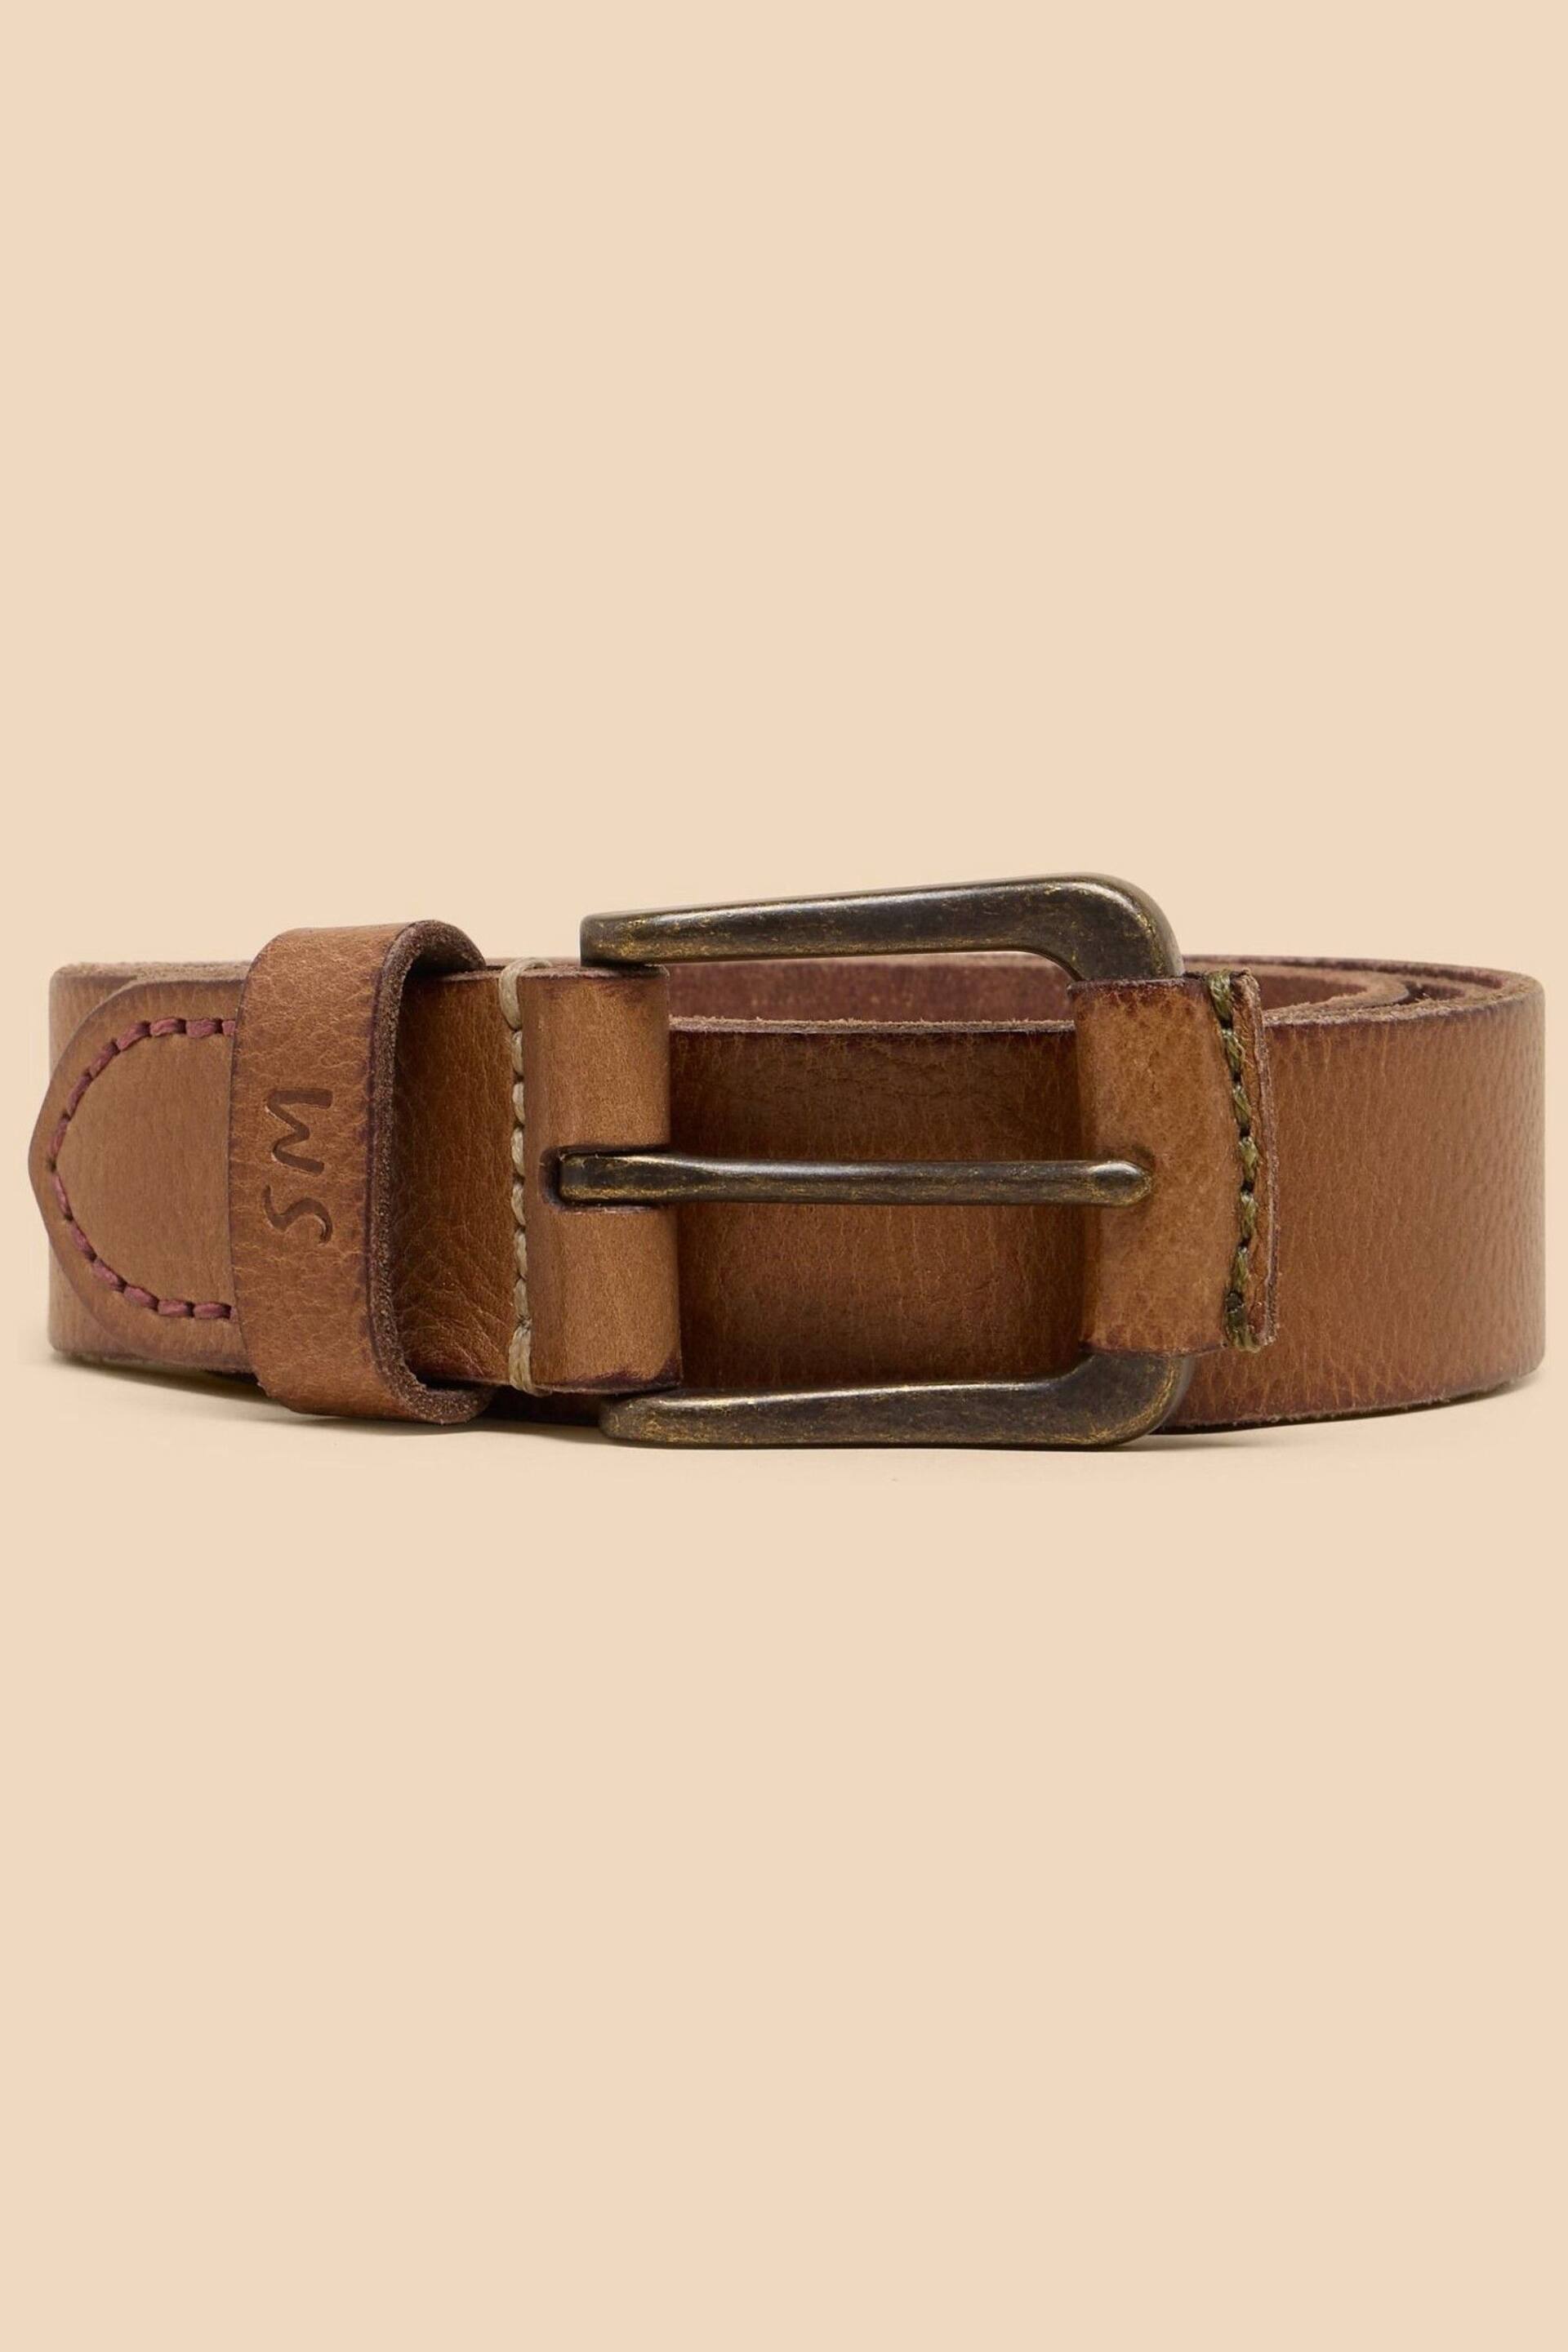 White Stuff Brown Leather Belt - Image 2 of 3